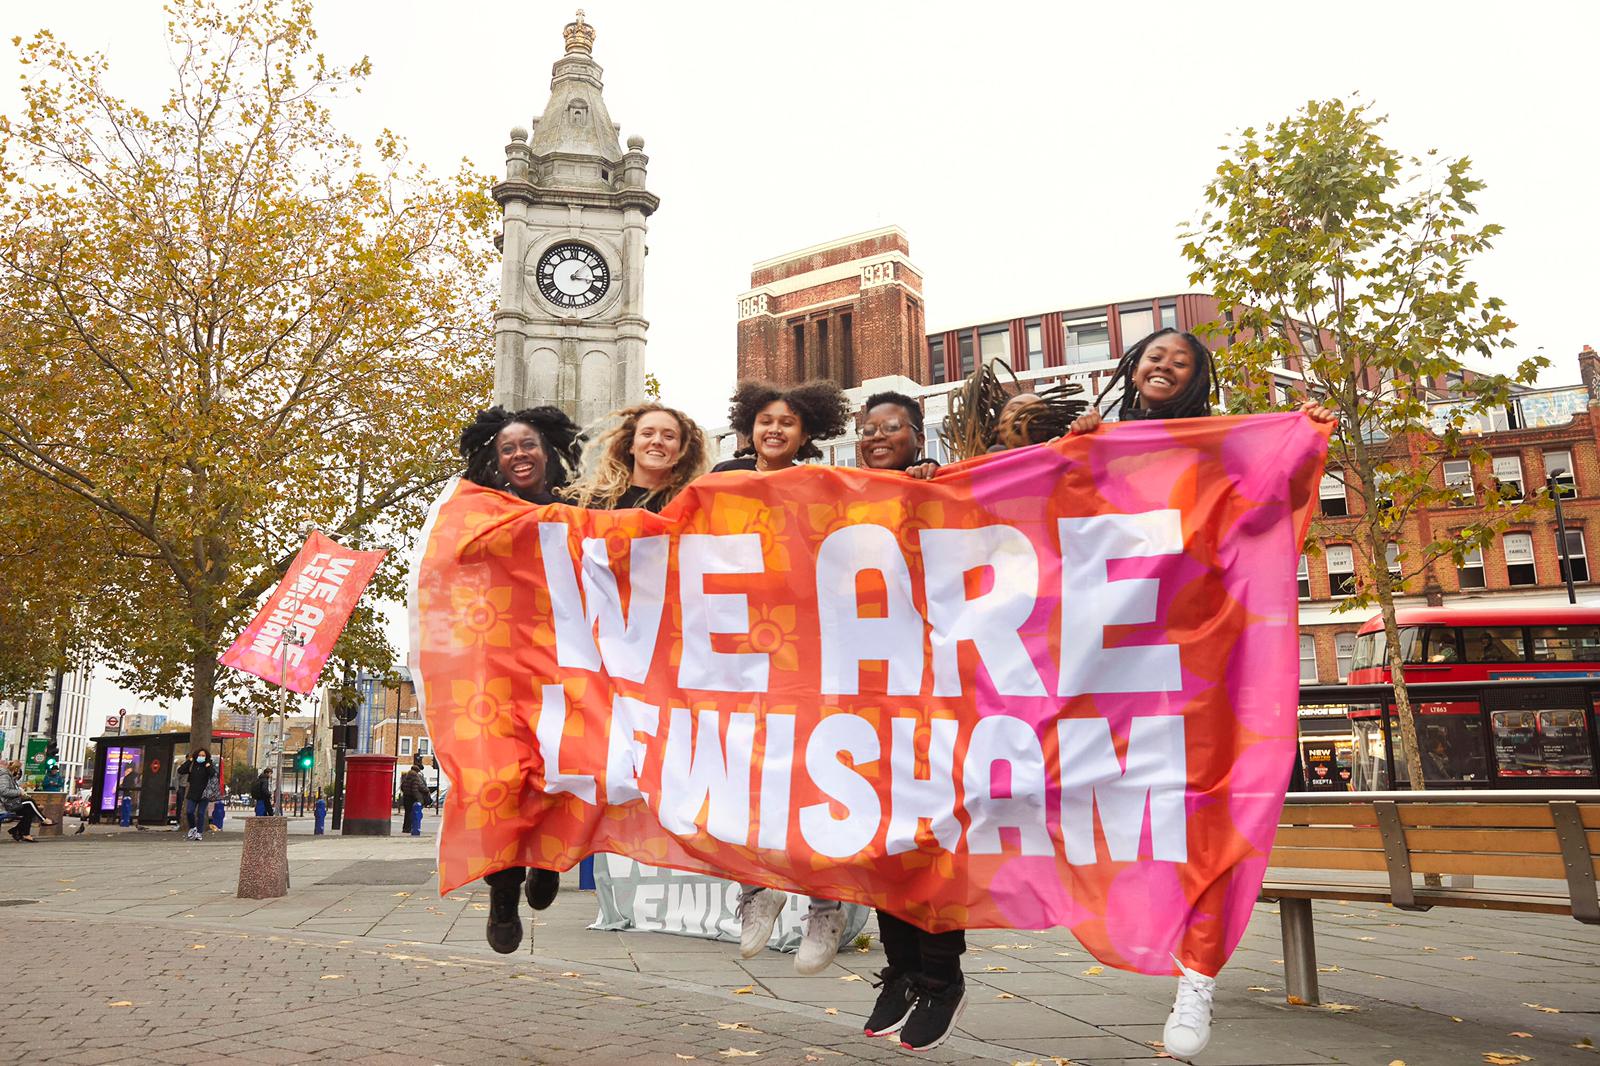 A photograph of a group of people holding a sign that reads: We Are Lewisham.